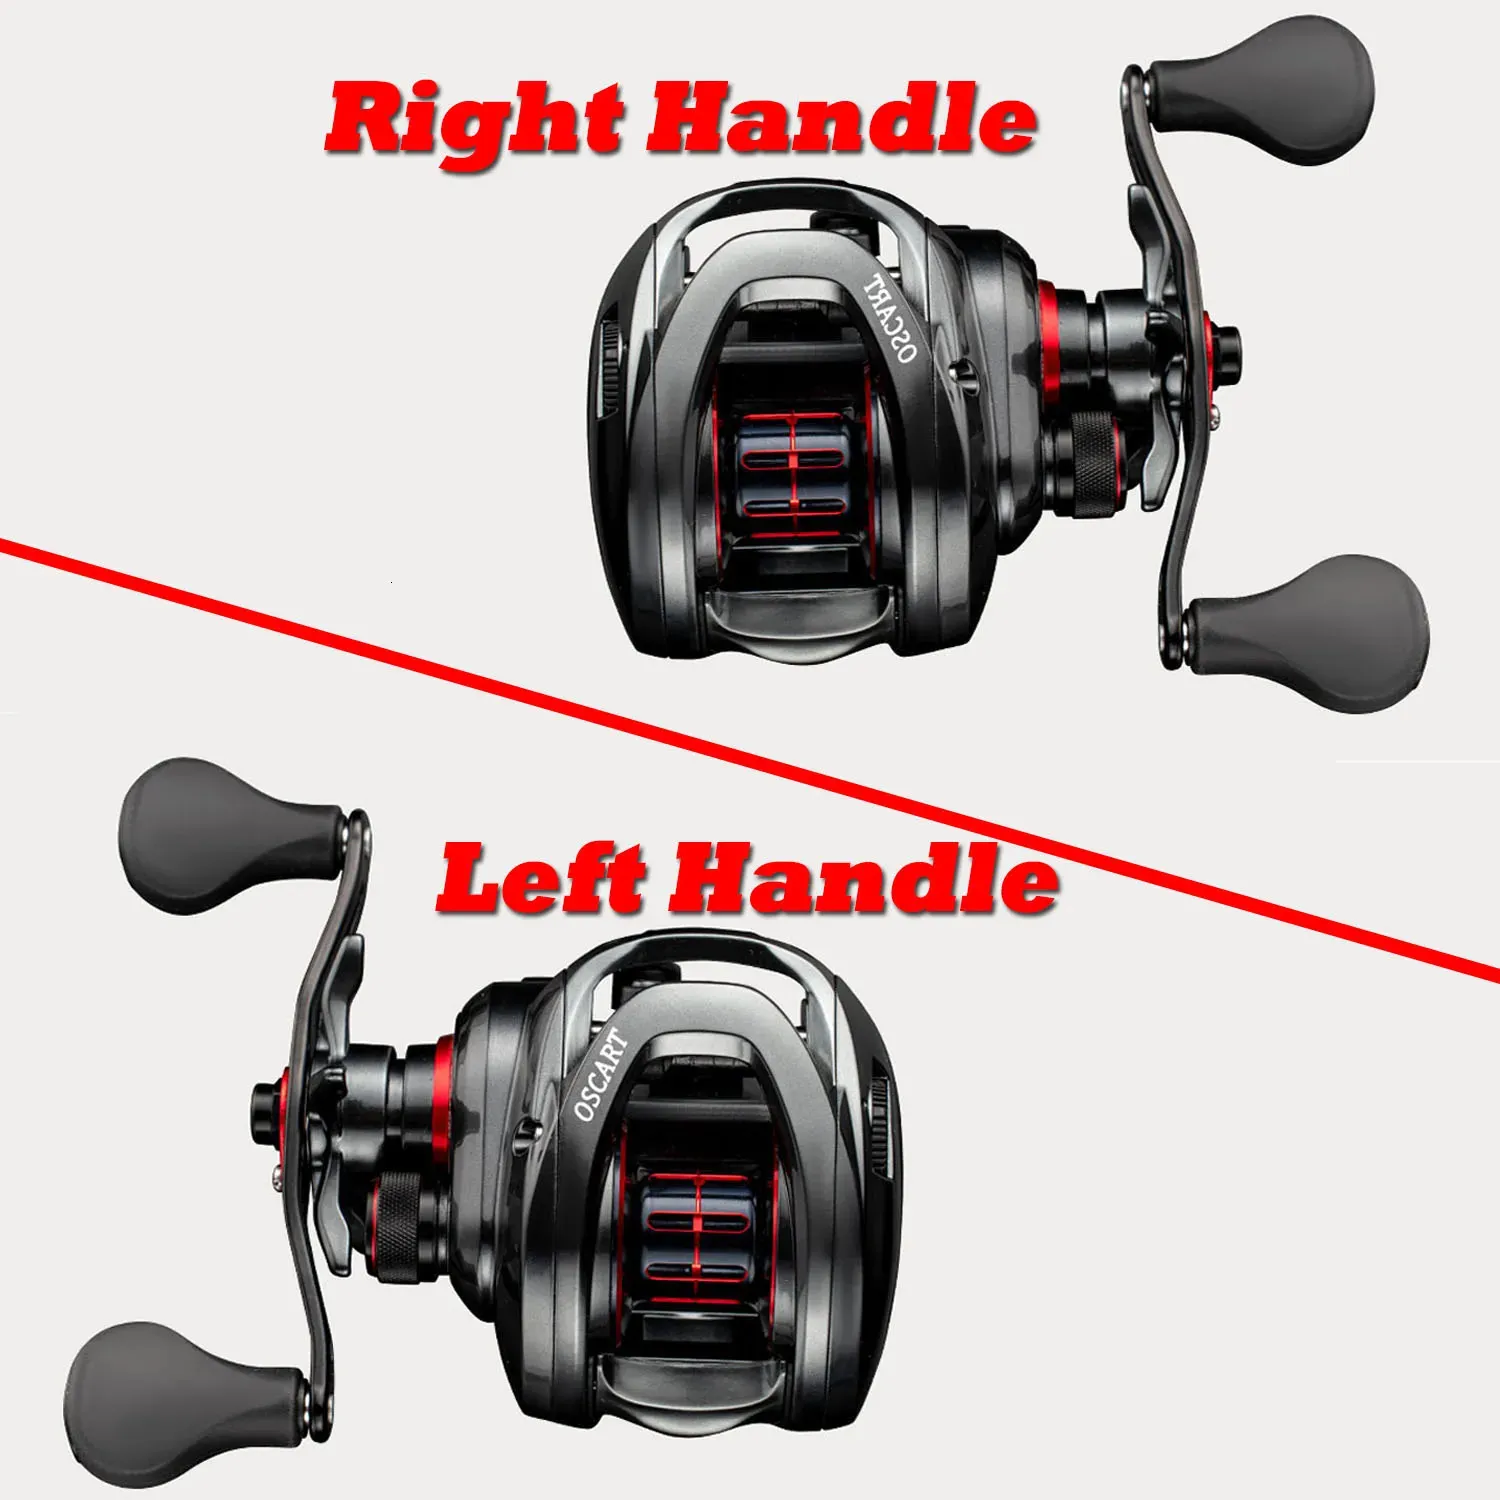 Fly Fishing Reels2 Bait Casting Reel 71 1 54 Brine Baitcaster 9BB Composite  Coil Gear 231117 From Pang05, $38.43